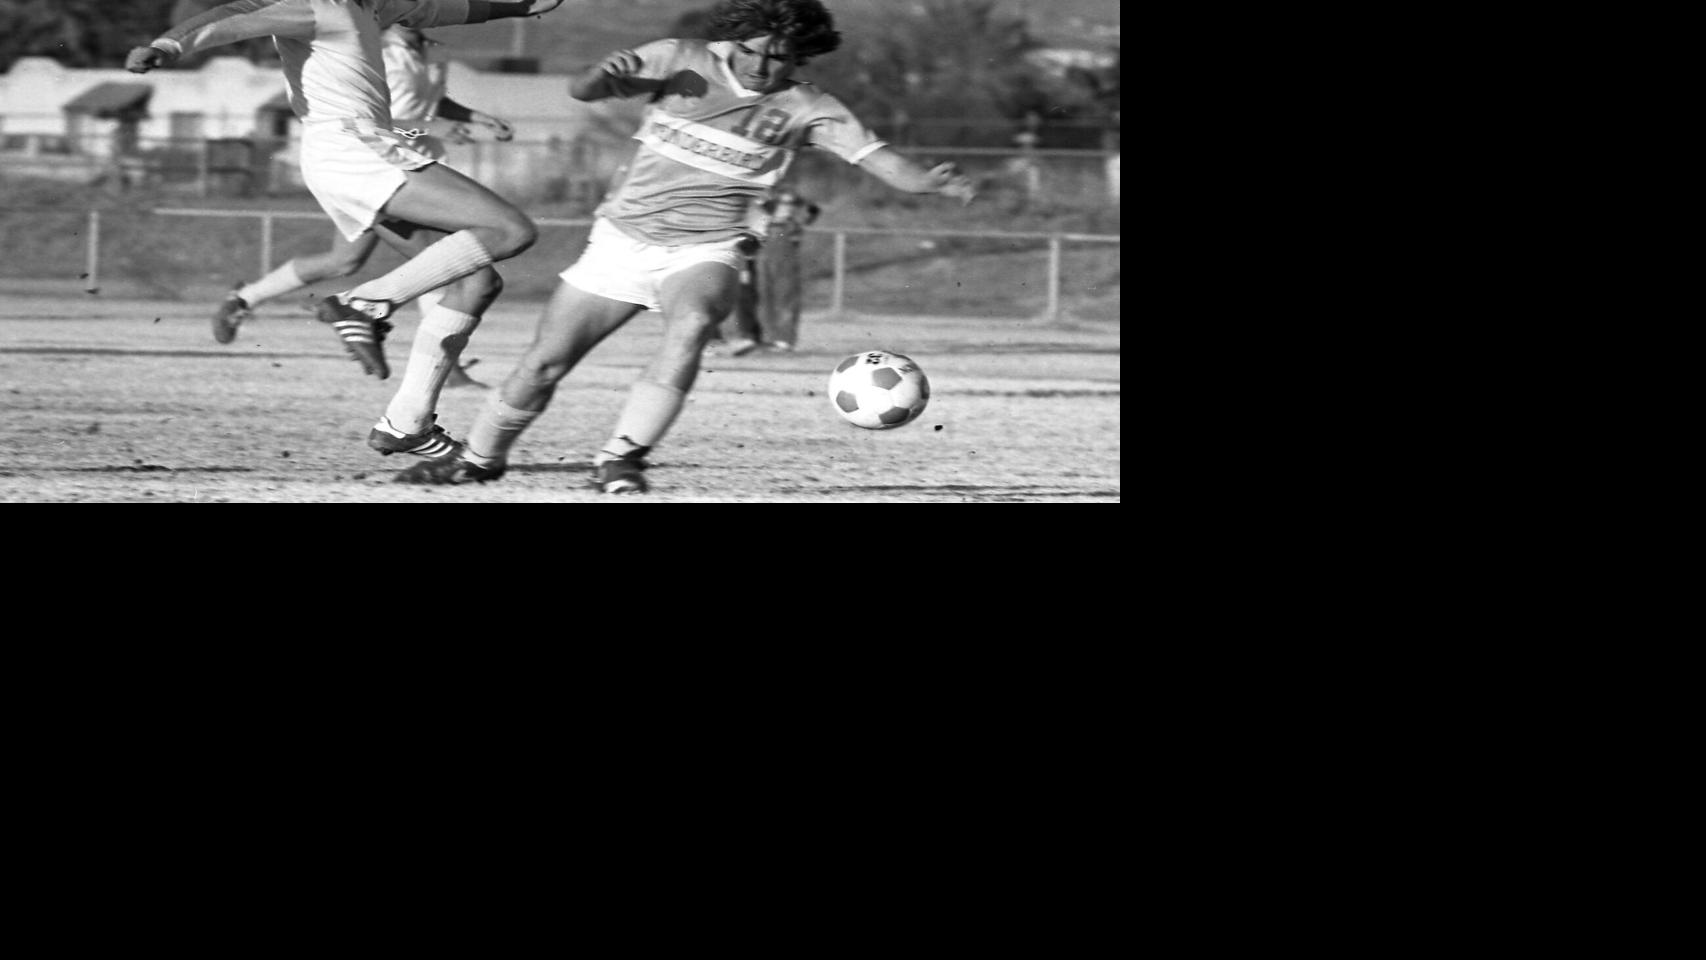 Hansen's Top Teams, No. 49: Wolfgang Weber's 1985 Lancers started the Salpointe soccer dynasty